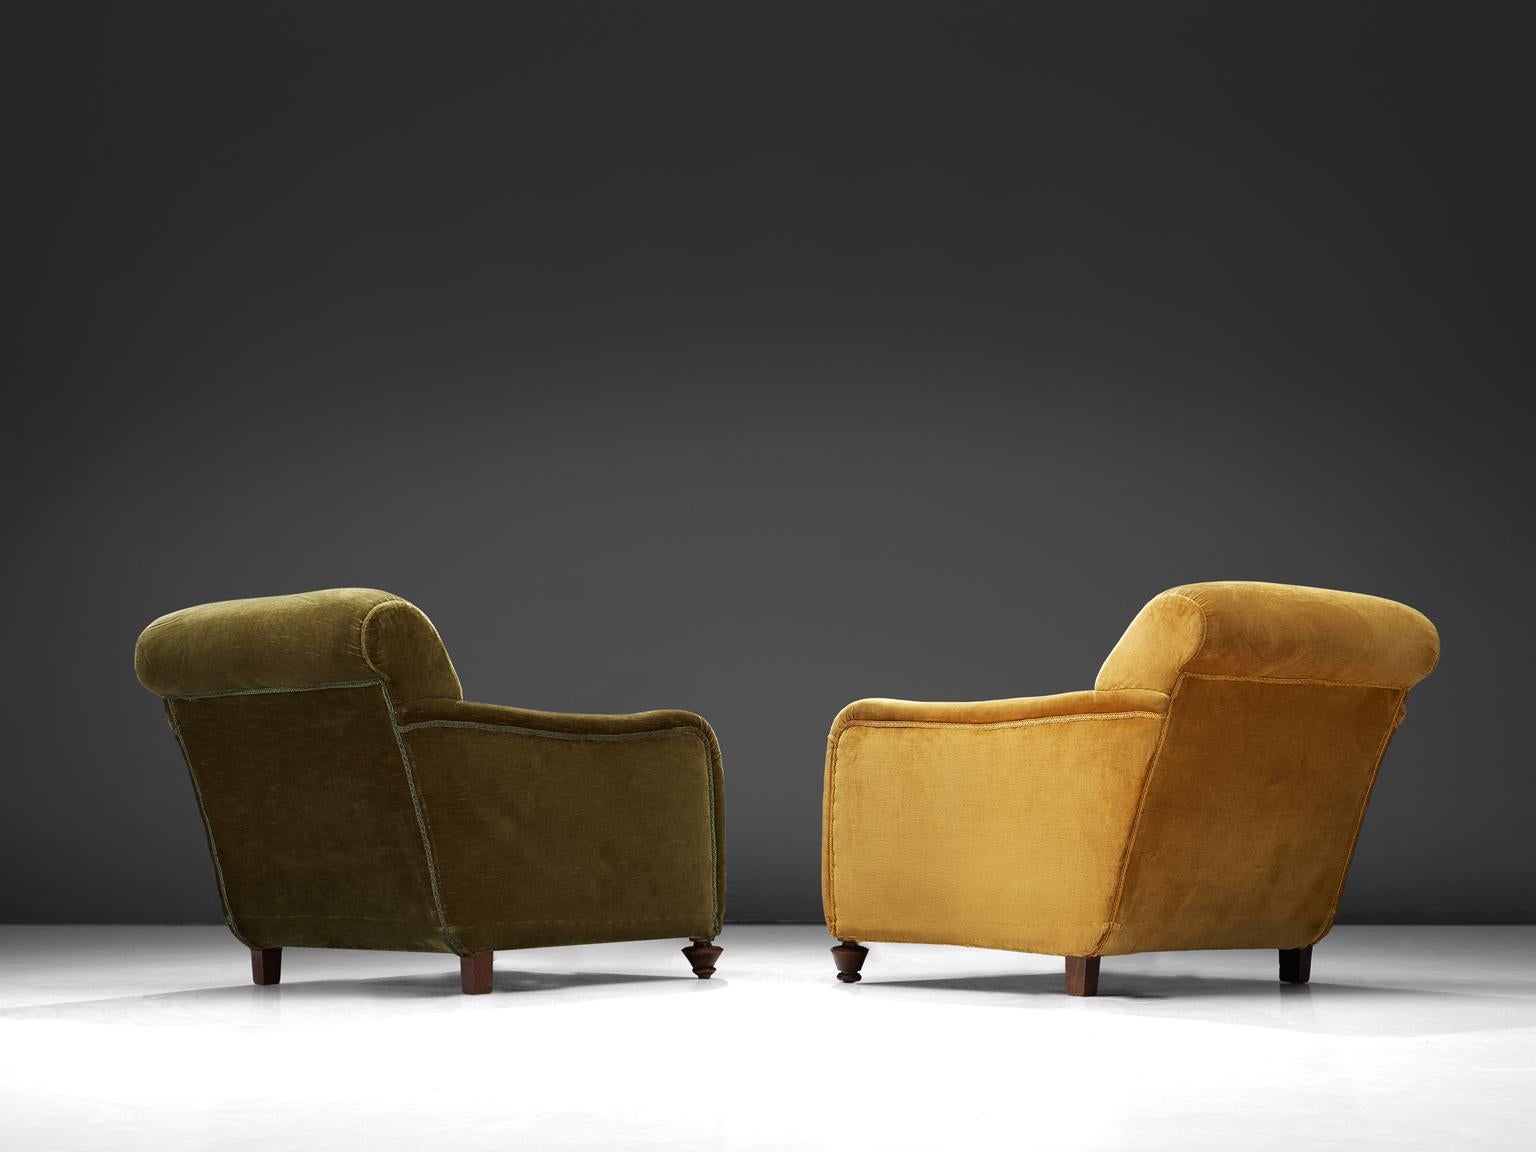 Set of two lounge chairs, green and yellow velvet fabric, wood, Italy, 1940s. 

Wide and comfortable chairs in green and yellow velvet fabric upholstery. Truly extraordinary lounge chairs that feature a very deep seat and cornered curved armrests.